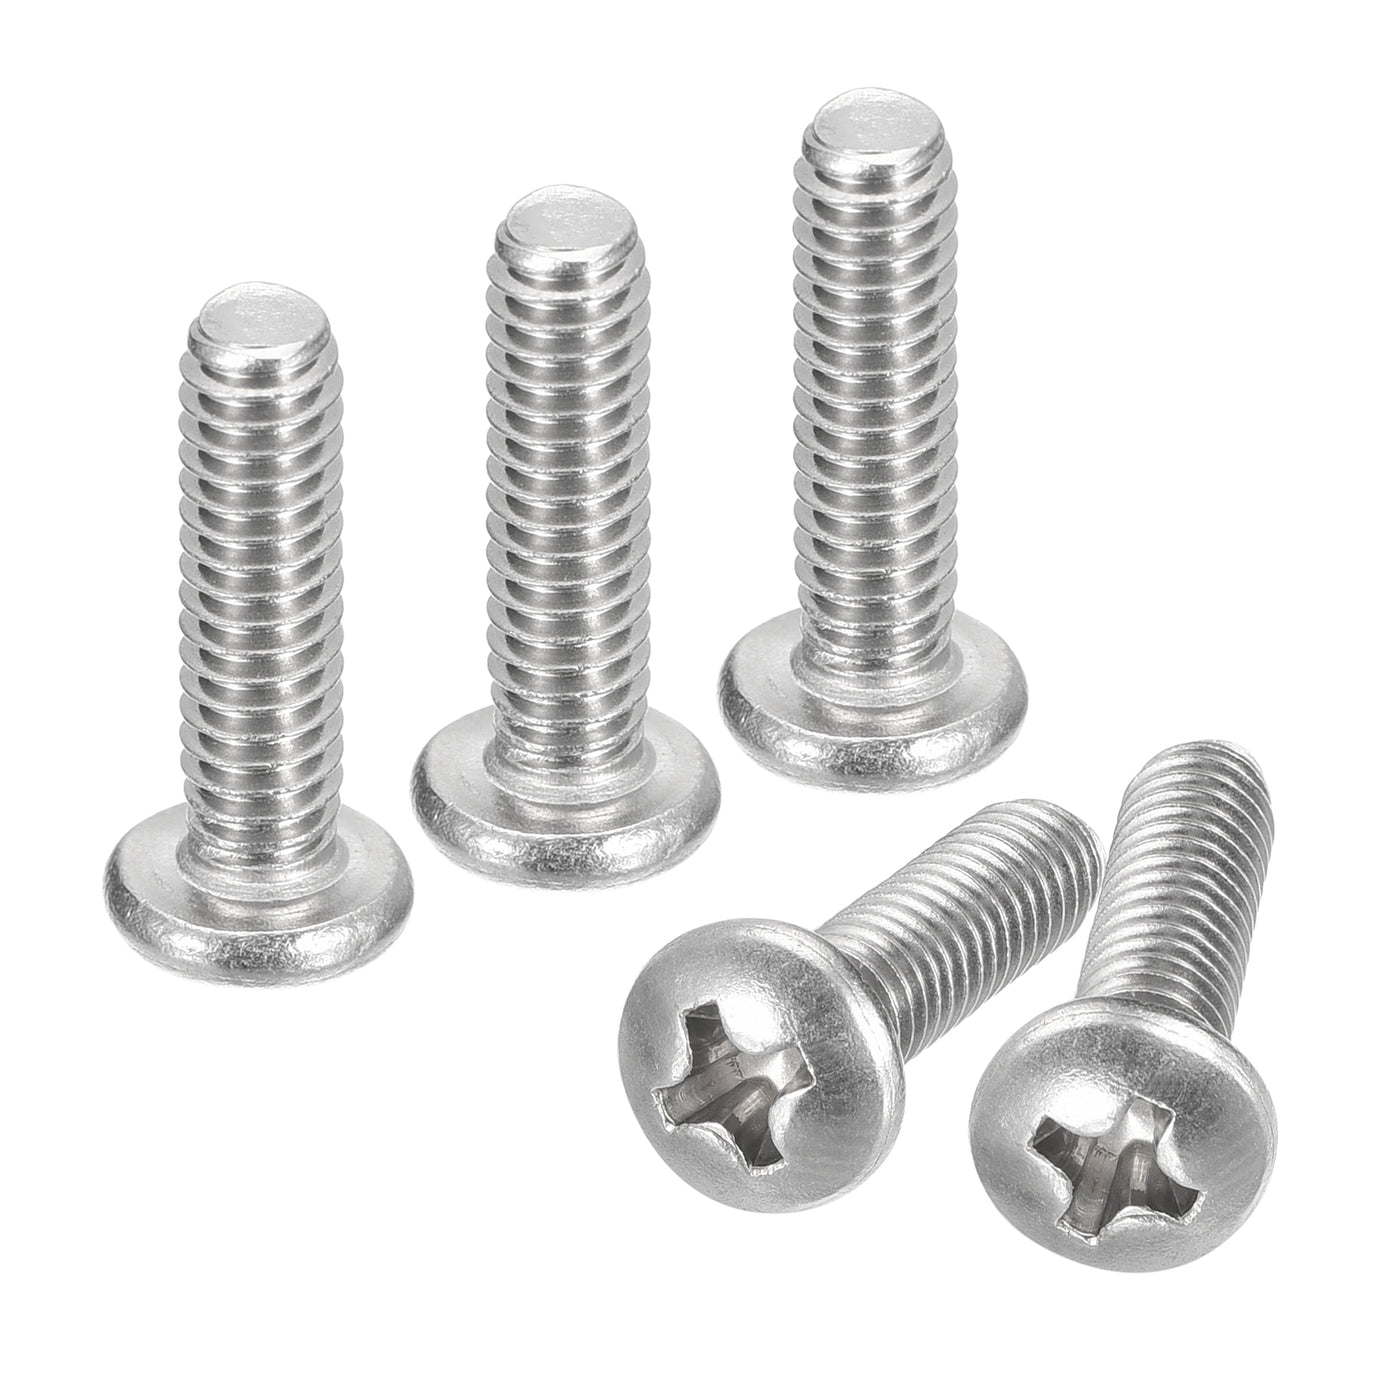 uxcell Uxcell #8-32x5/8" Pan Head Machine Screws, Stainless Steel 18-8 Screw, Pack of 20